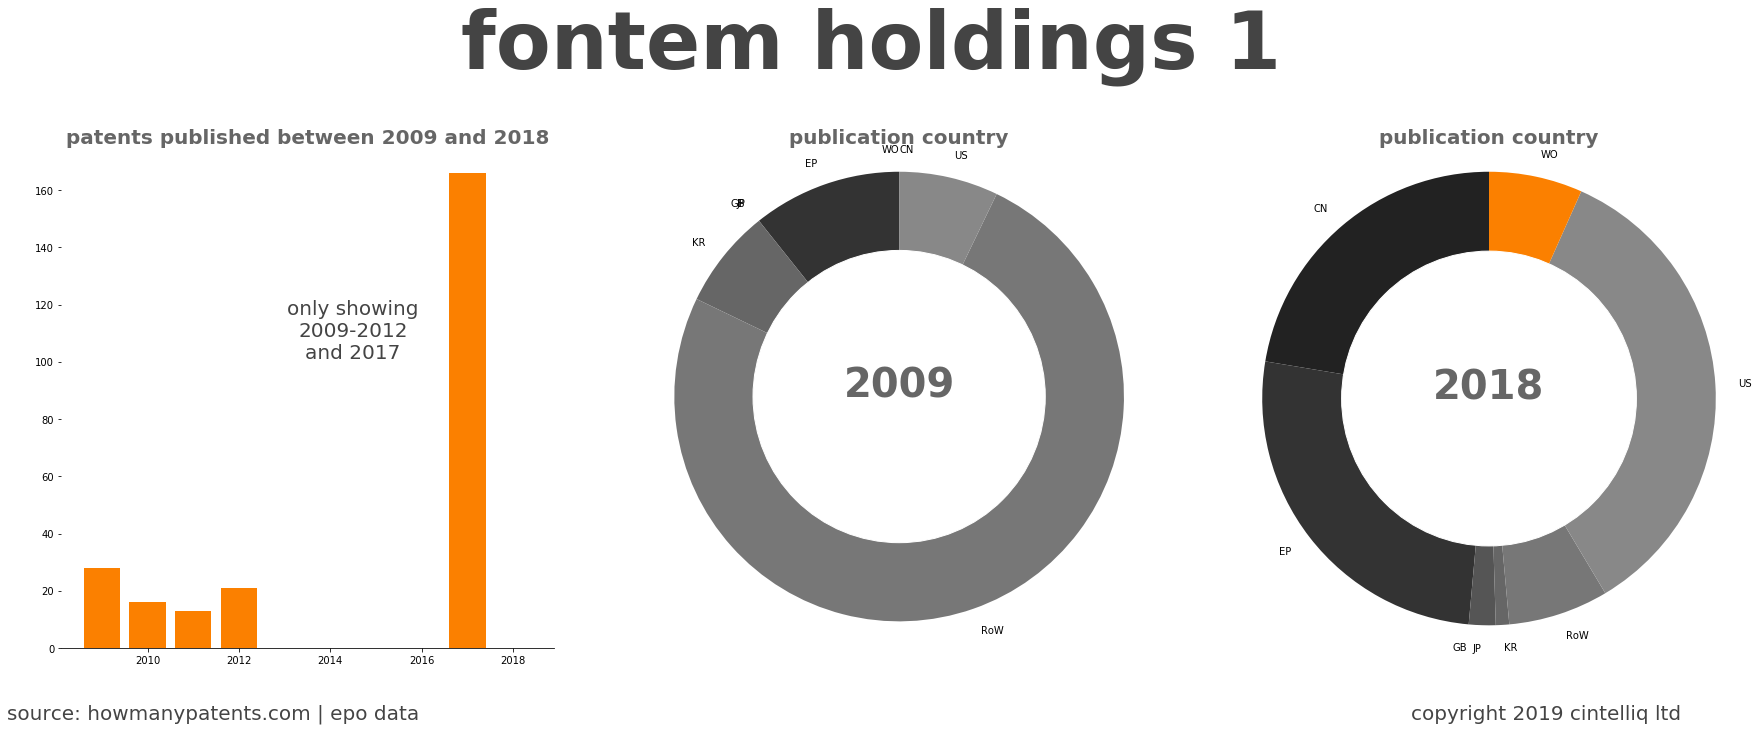 summary of patents for Fontem Holdings 1